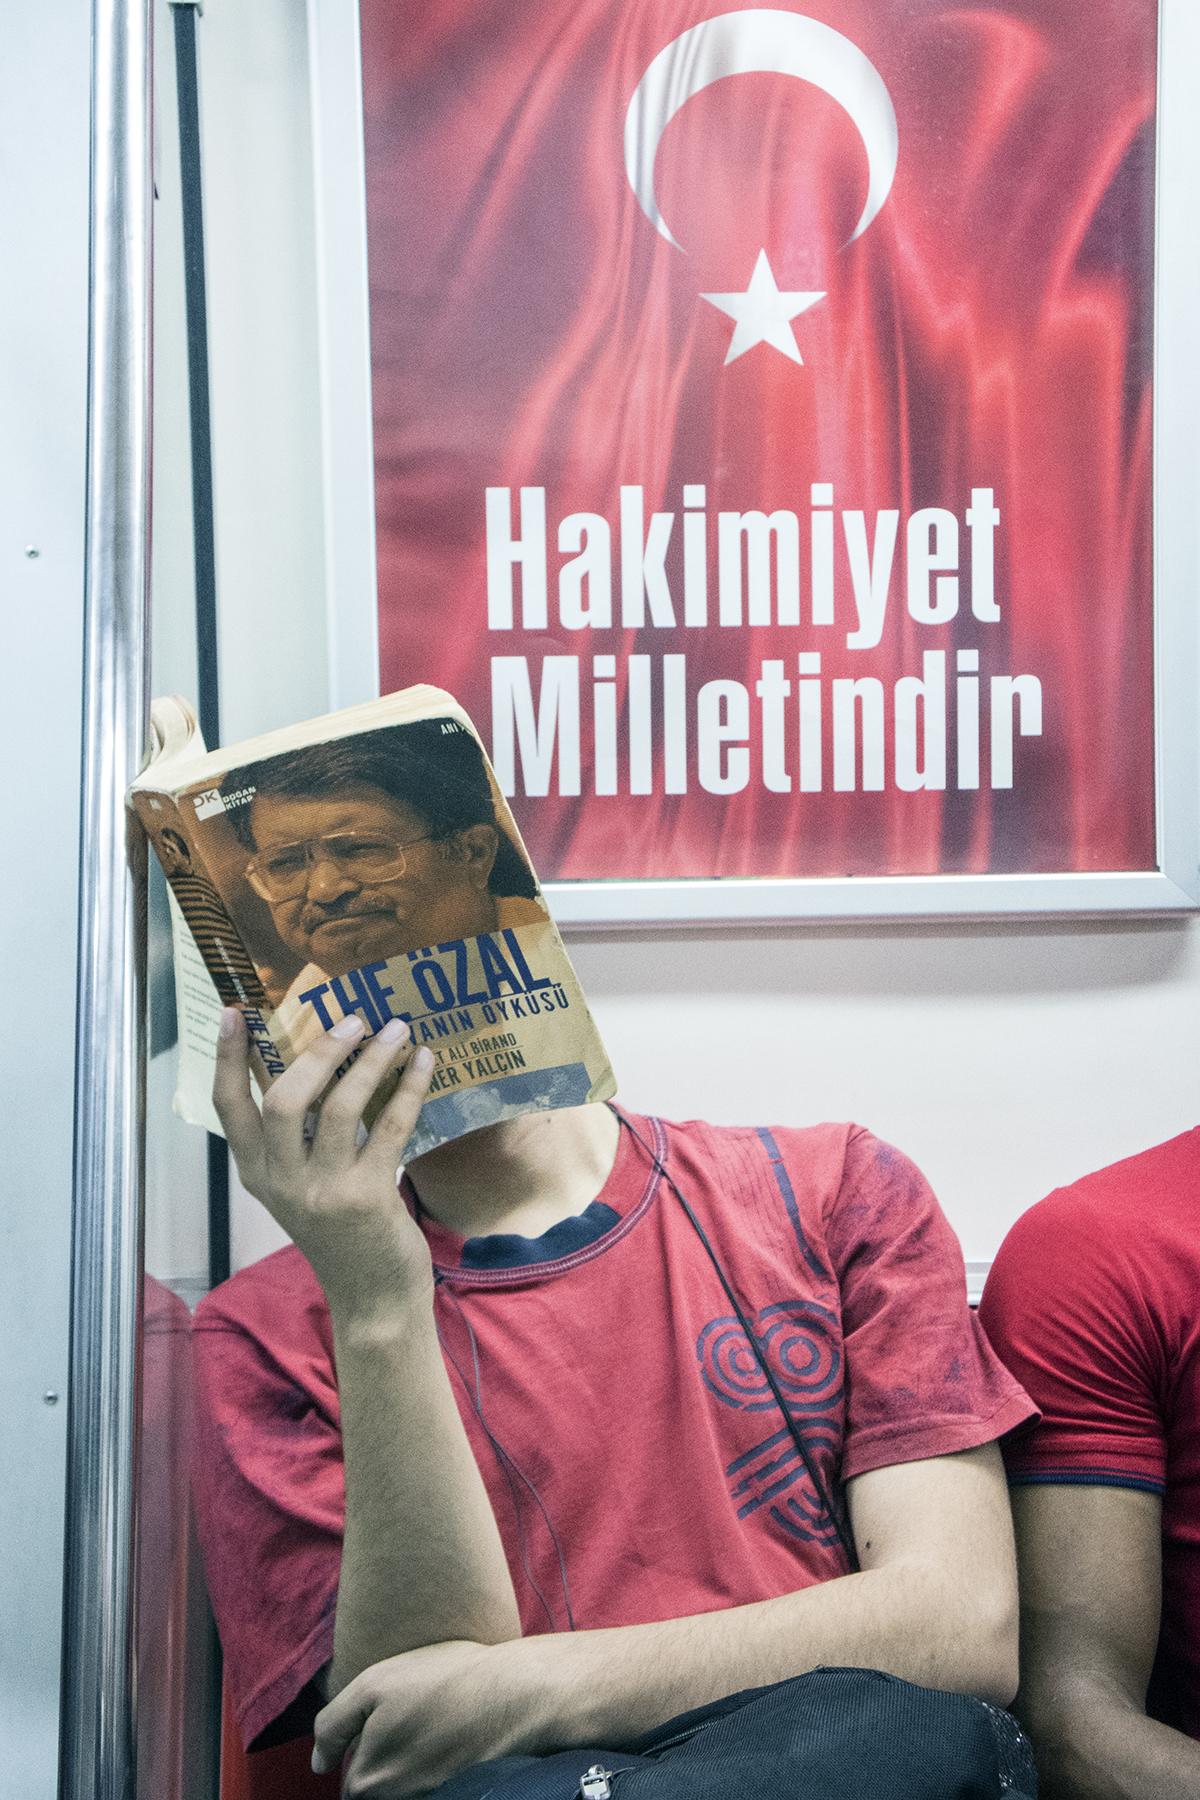 #216 —Hacıosman Subway -
A university student reads his book on the subway.
